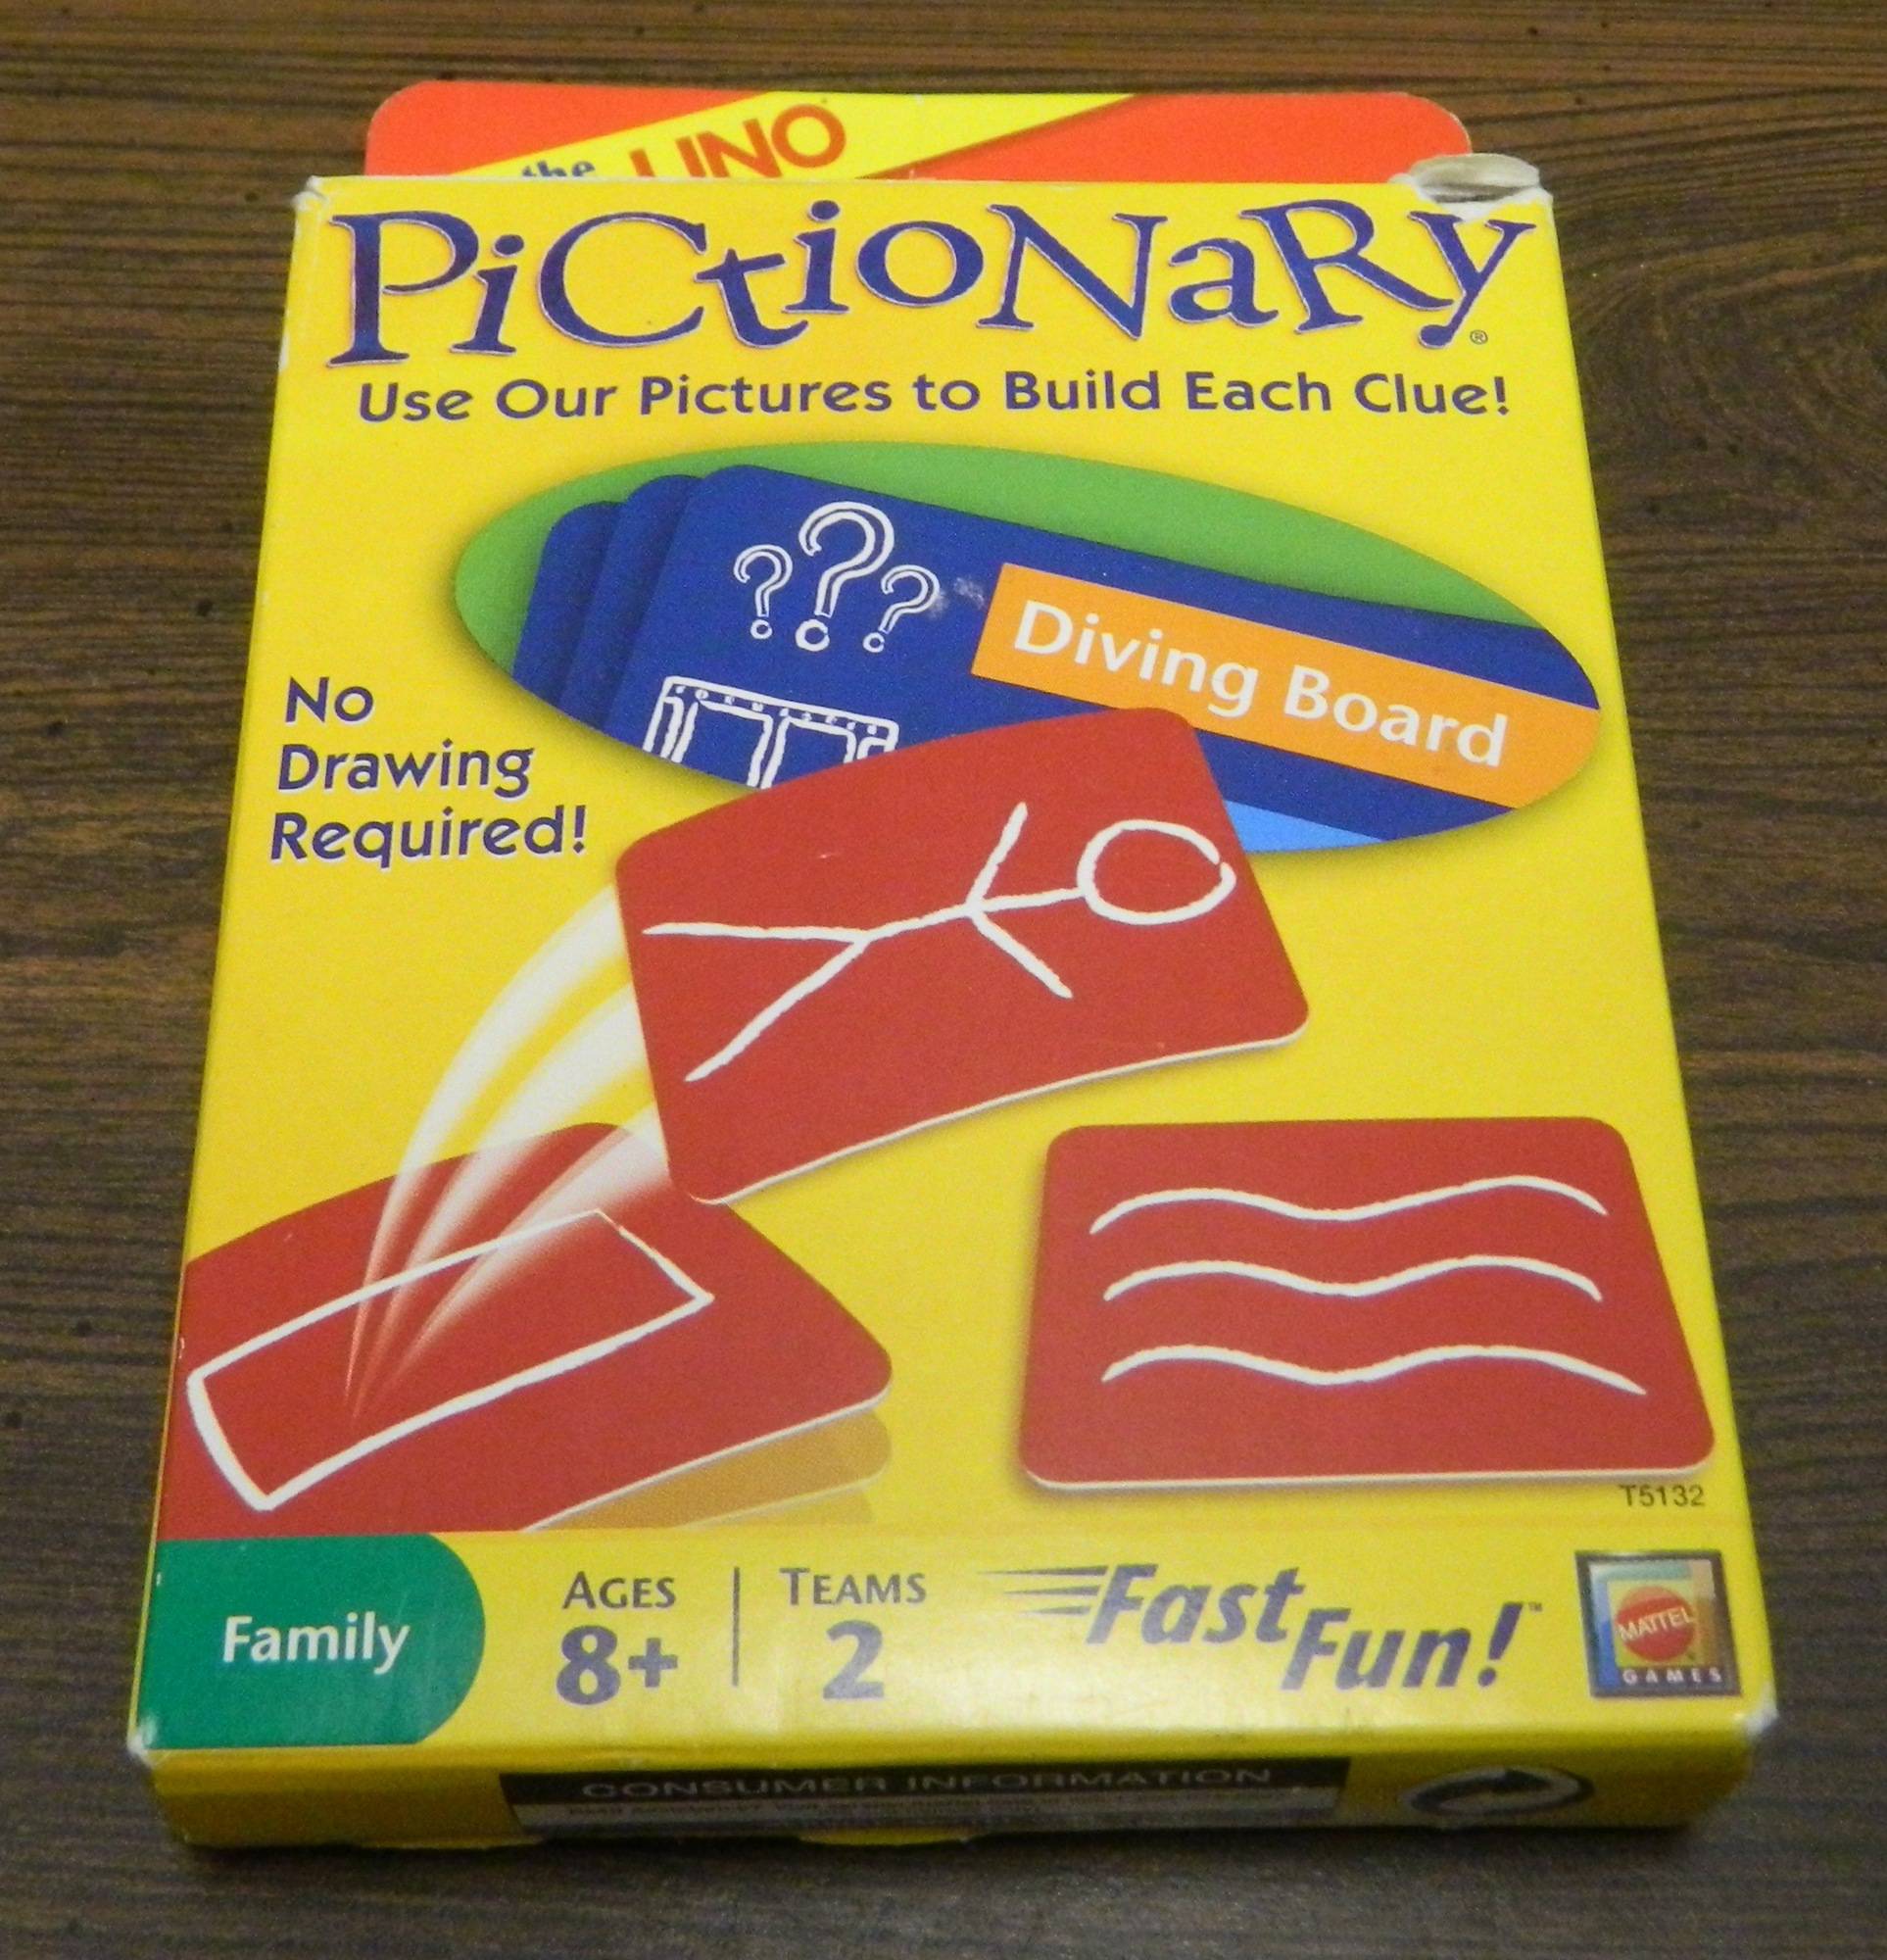 Pictionary Card Game Review and Rules